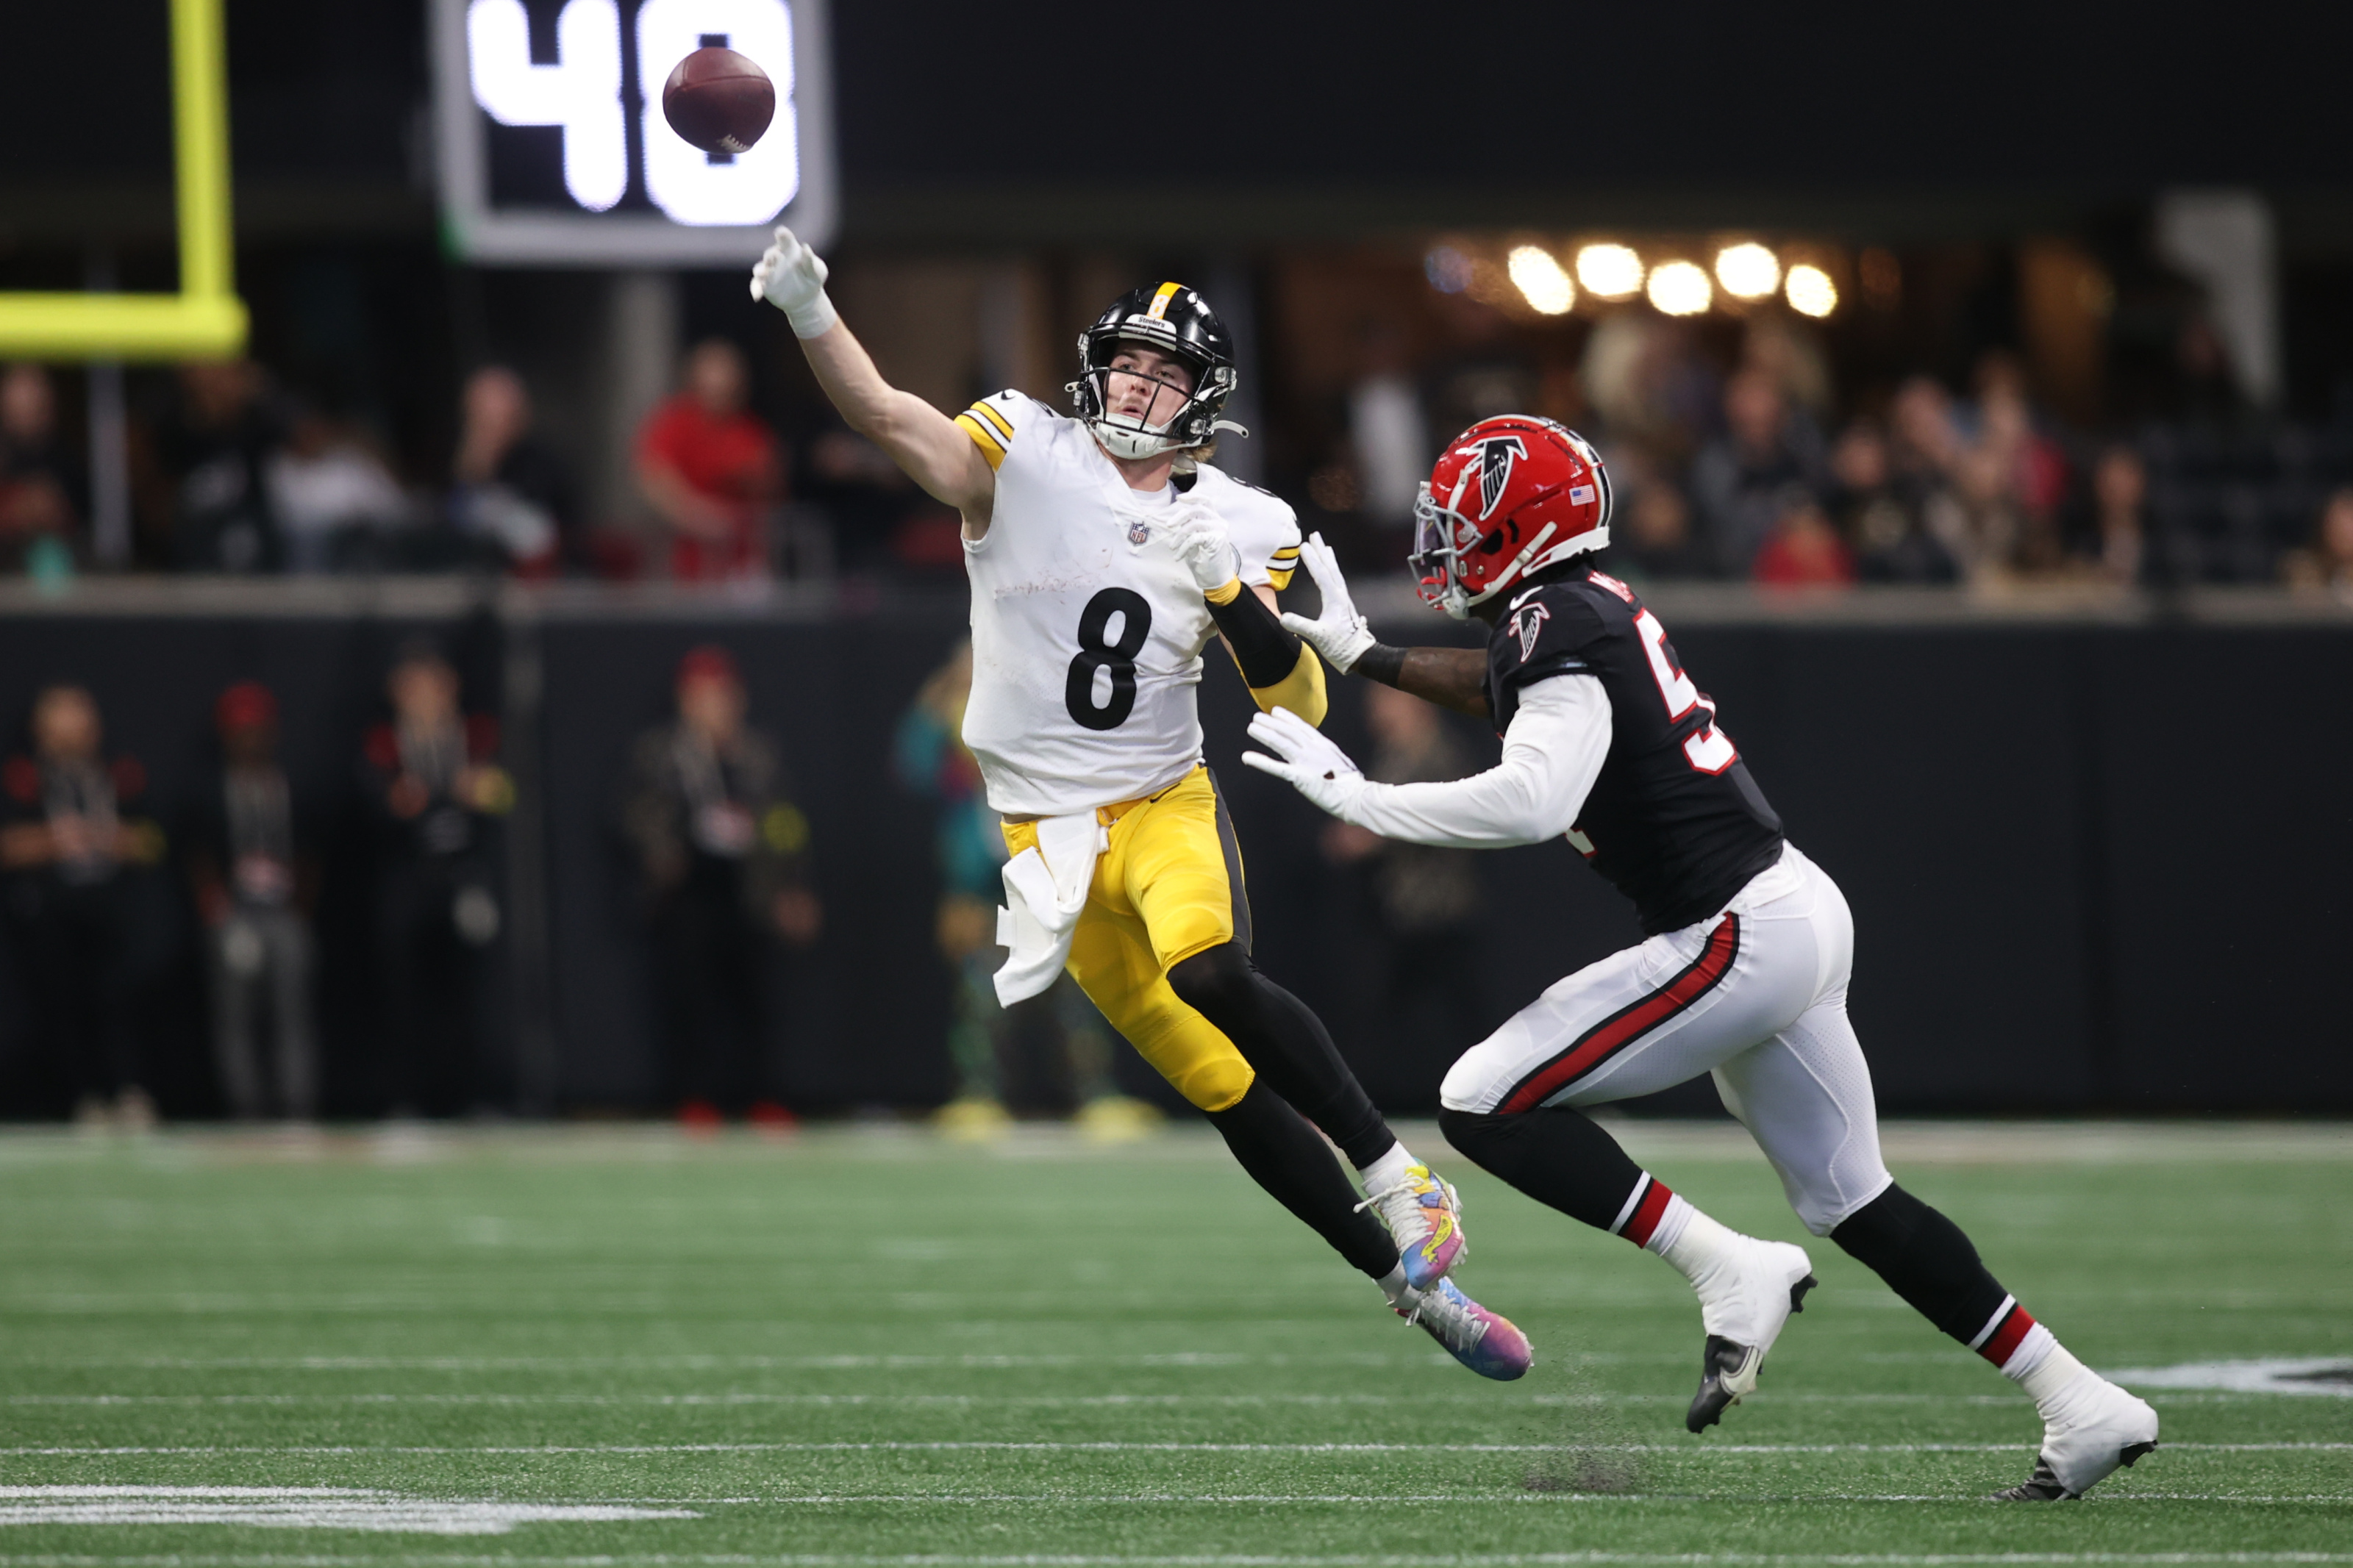 2023 NFL Draft: Steelers Stack The Deck For QB Kenny Pickett